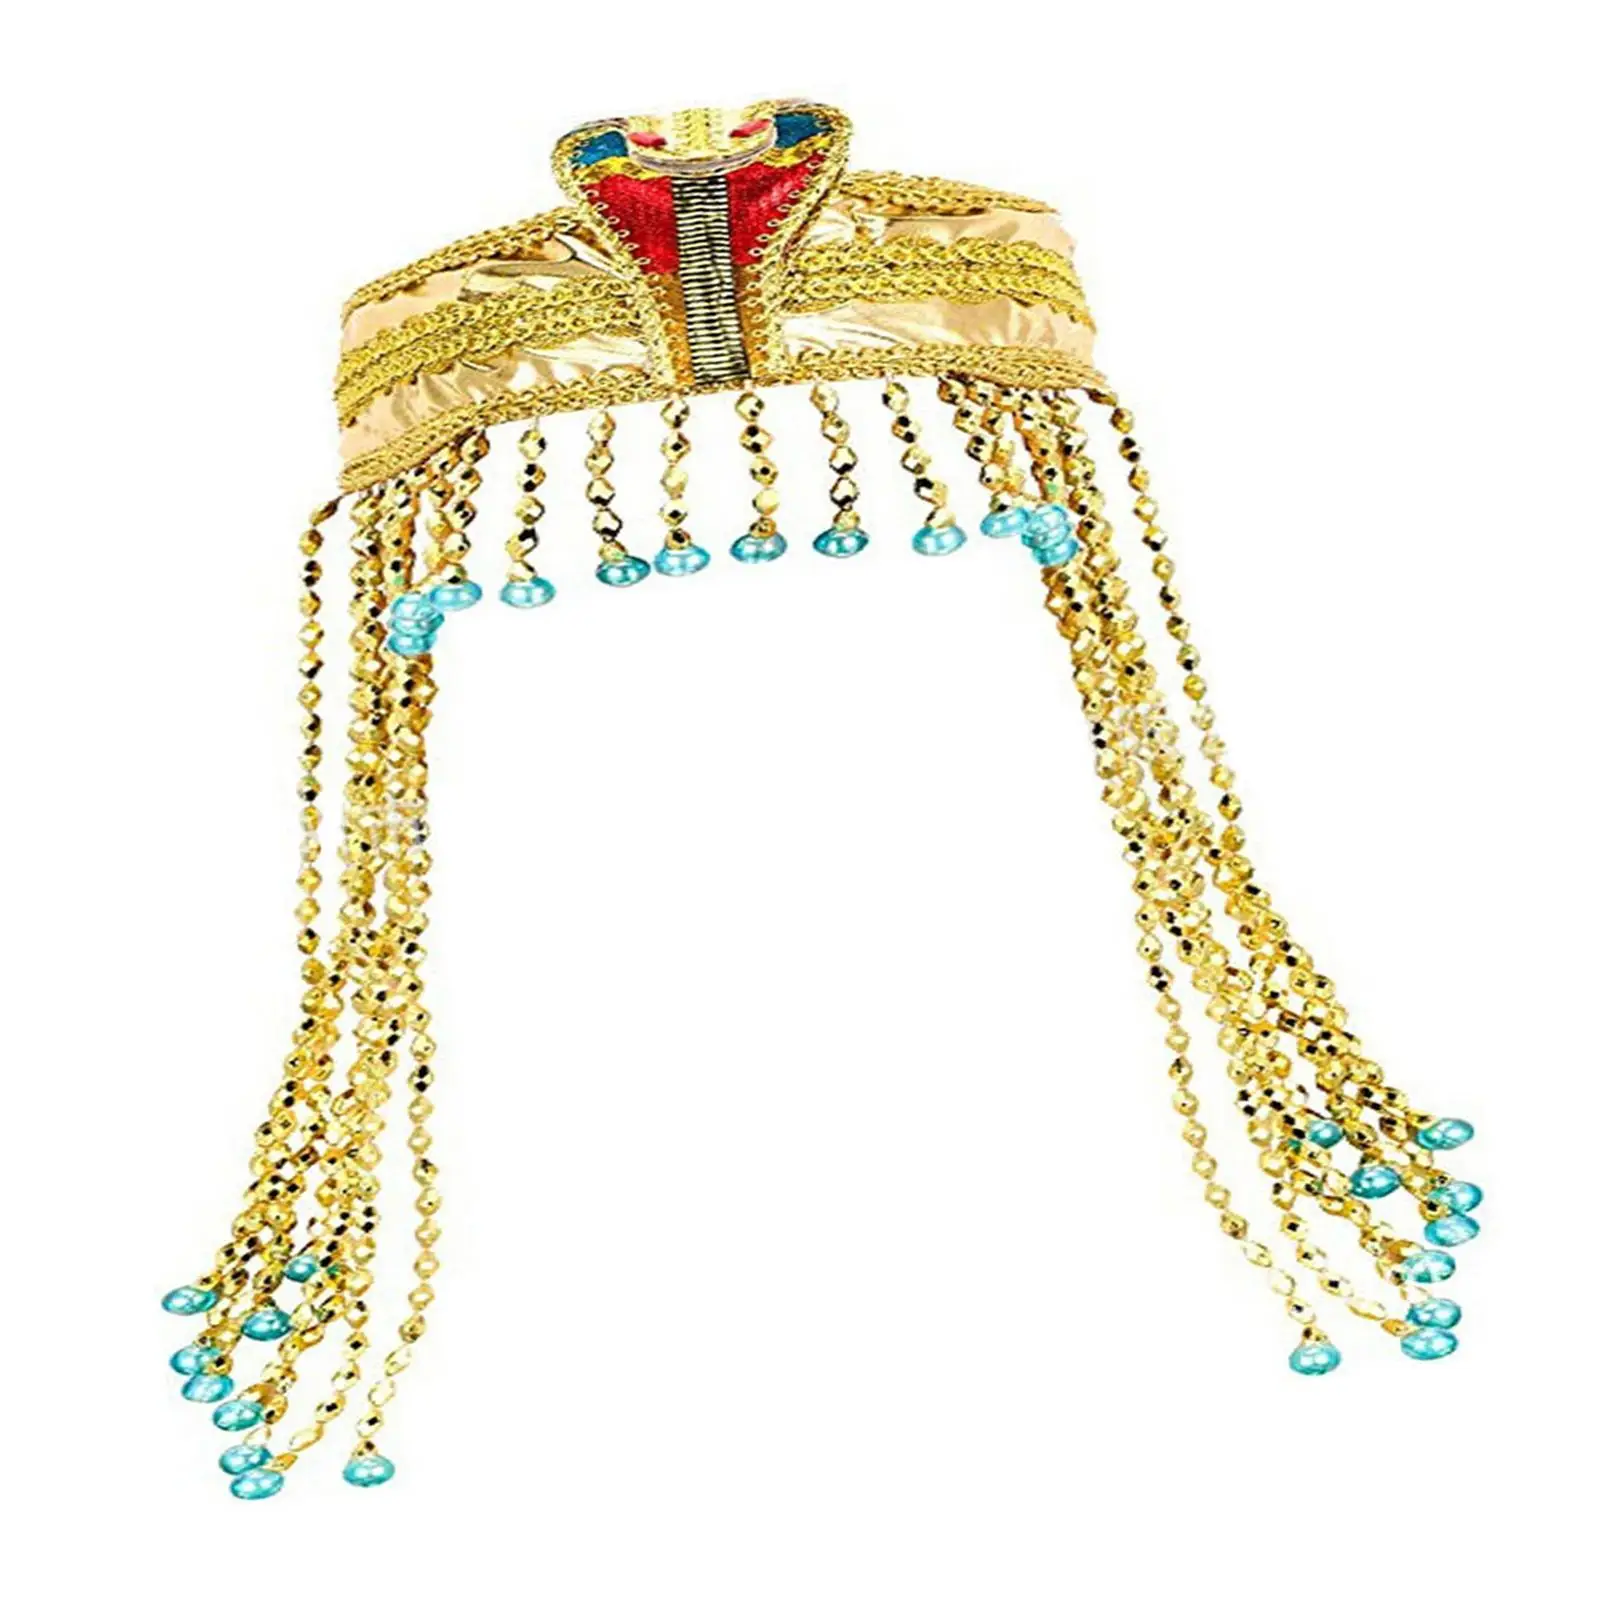 

Exquisite Egypt Queen Headdress Gift Snake Headdress Fashion Costume for Holiday Fancy Dress Stage Performance Masquerade